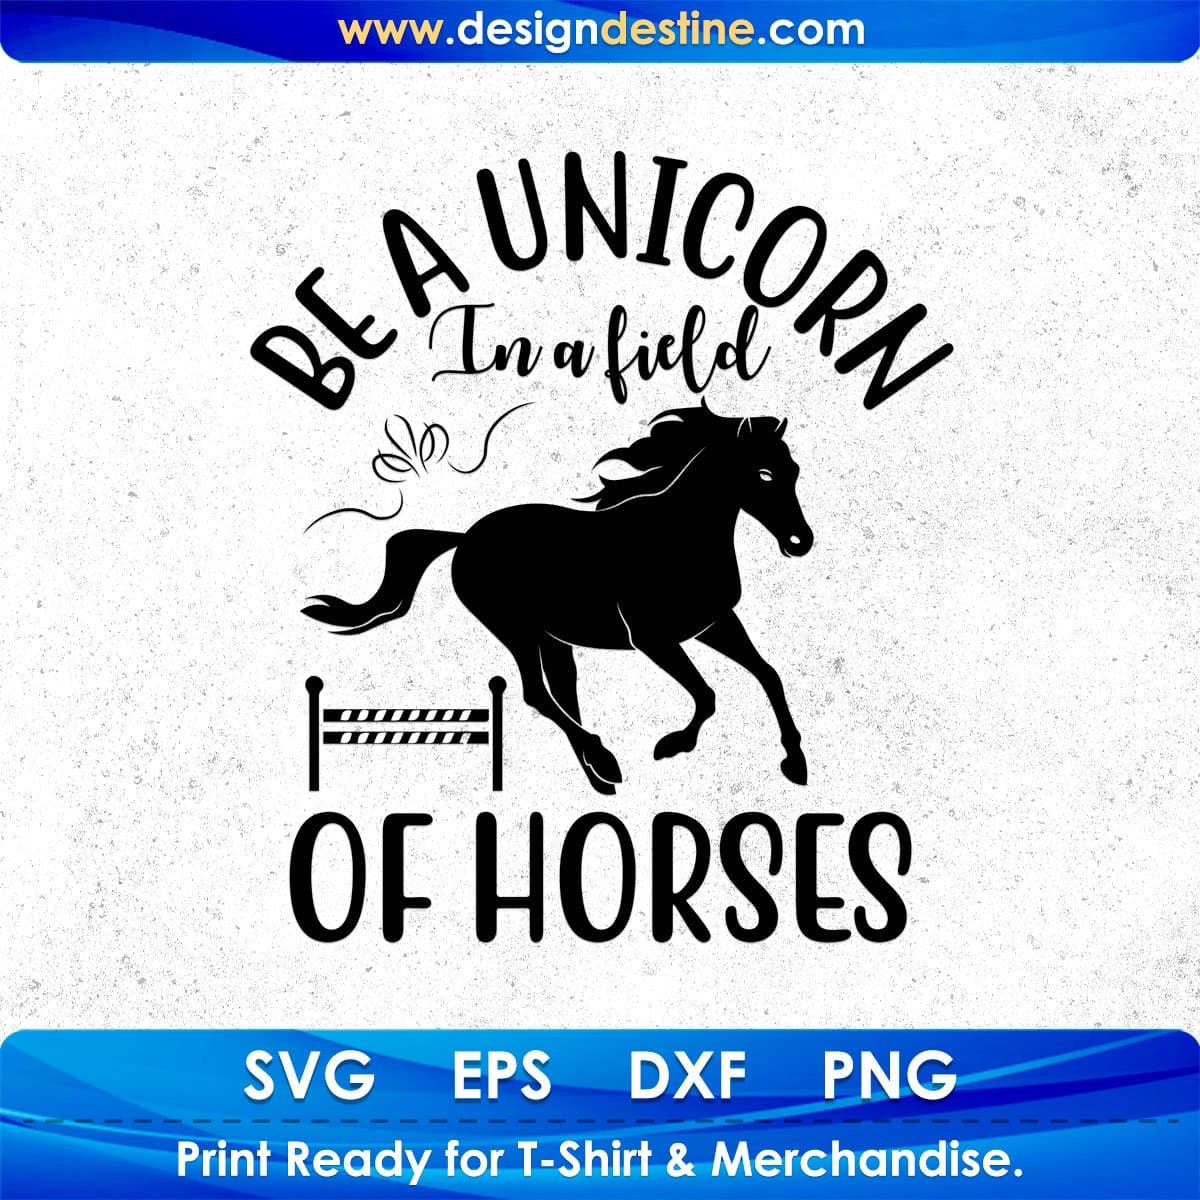 Be A Unicorn In A Field Of Horses T shirt Design In Svg Png Cutting Printable Files